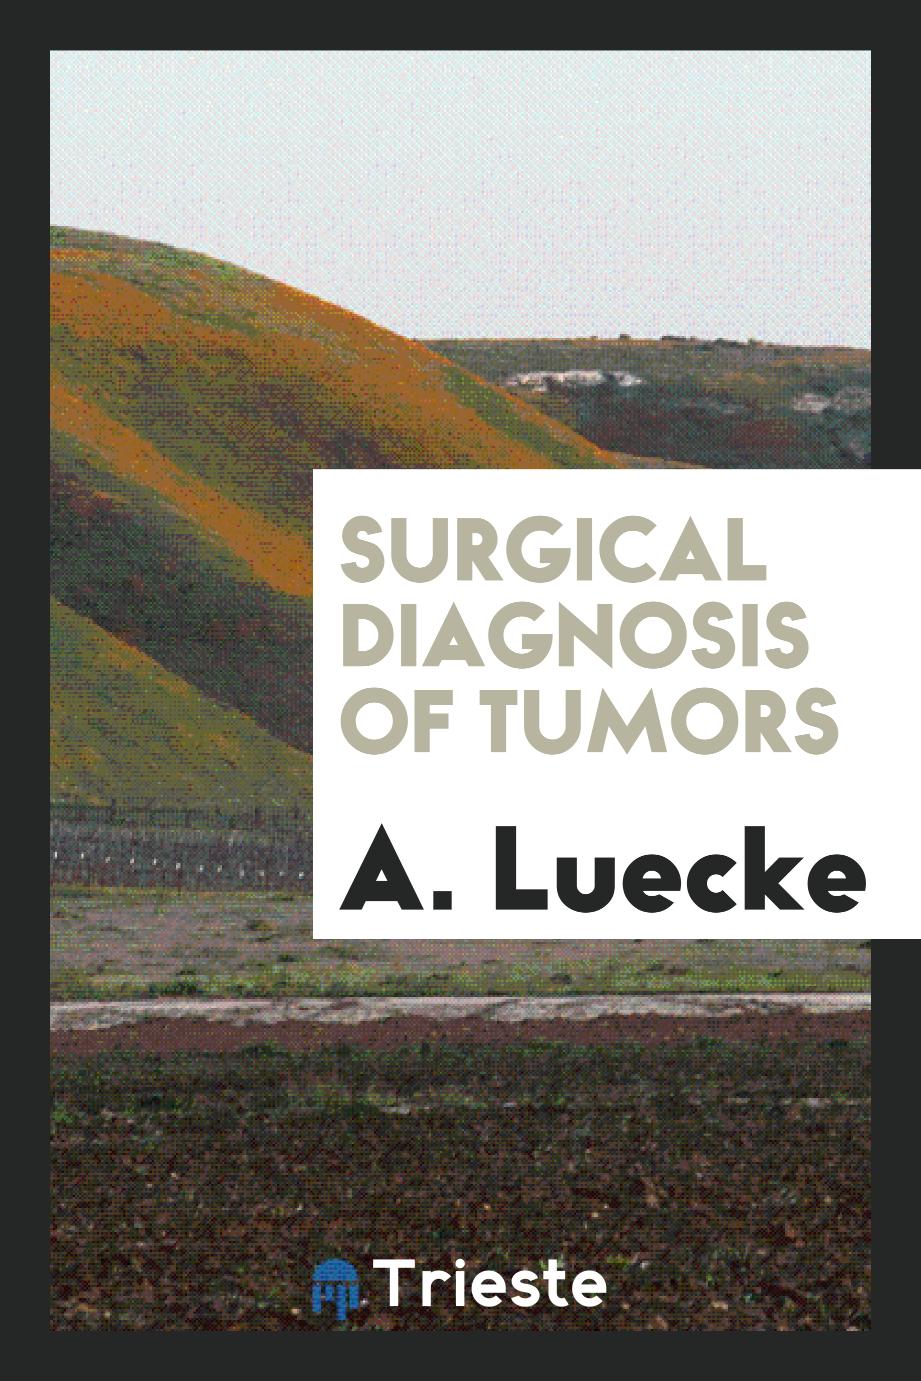 Surgical diagnosis of tumors